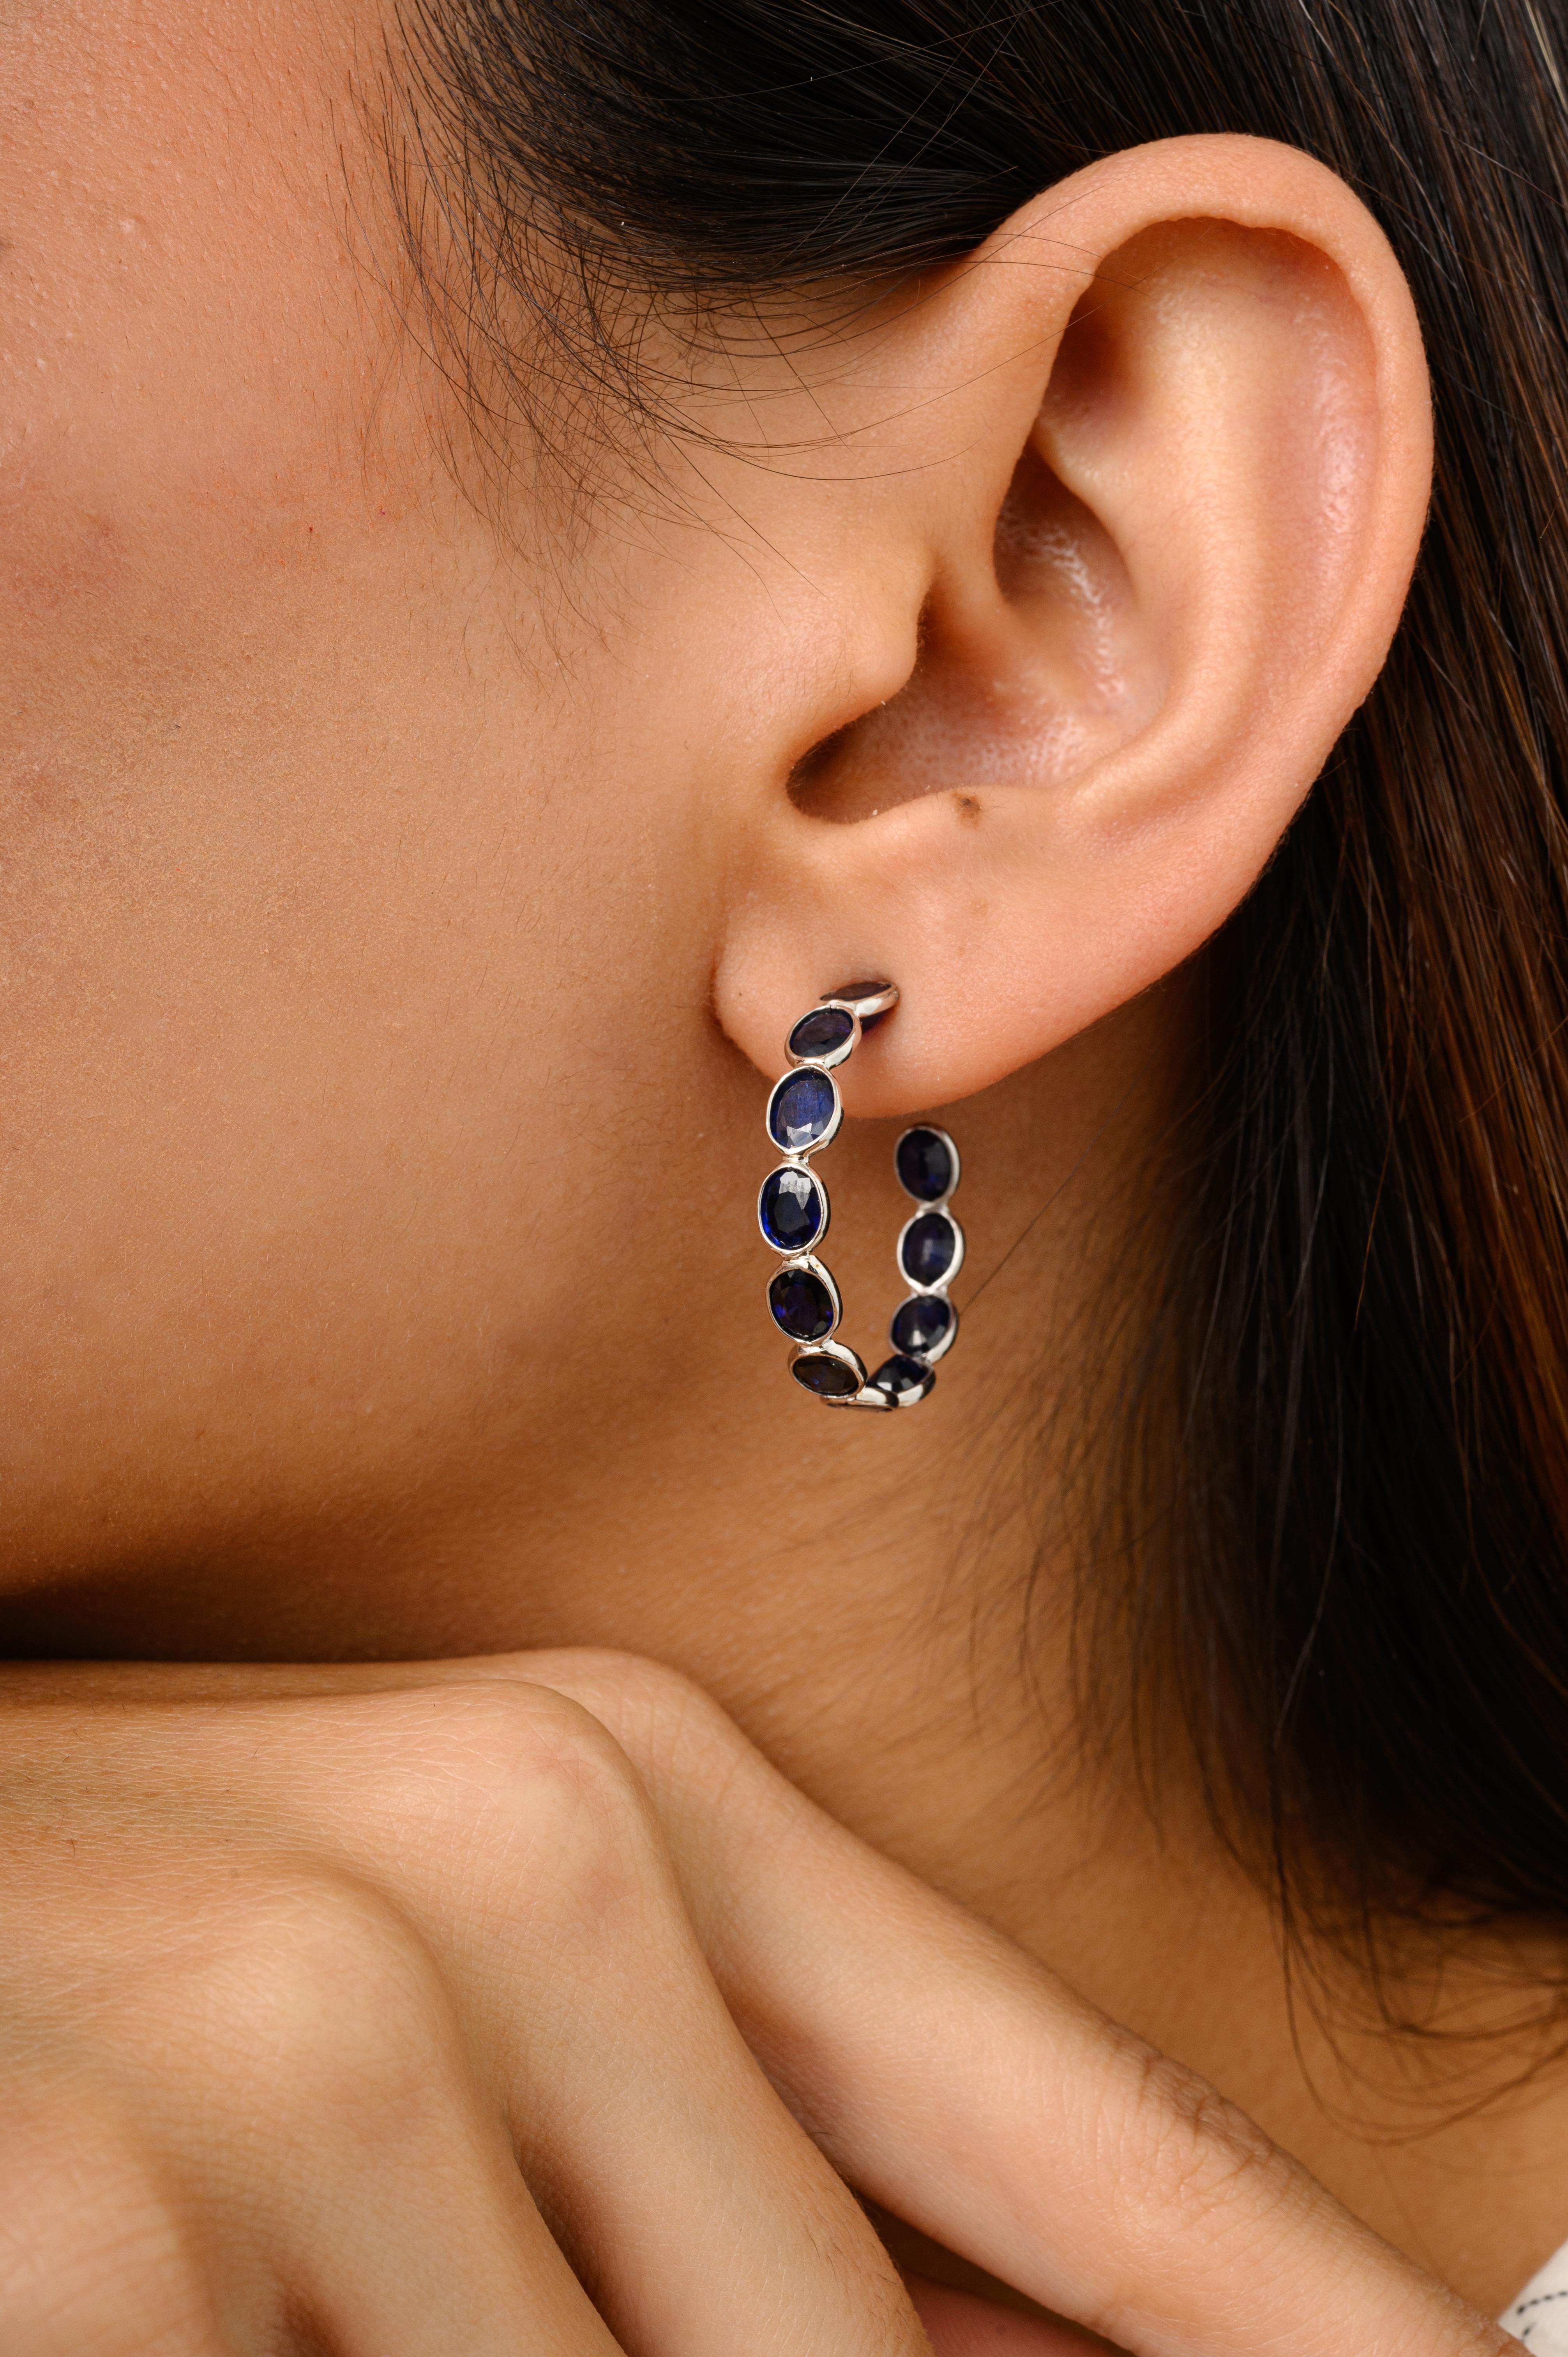 Handmade 9.07 Carat Blue Sapphire Hoop Earrings for Her in 18K Gold to make a statement with your look. You shall need hoop earrings to make a statement with your look. These earrings create a sparkling, luxurious look featuring oval cut blue